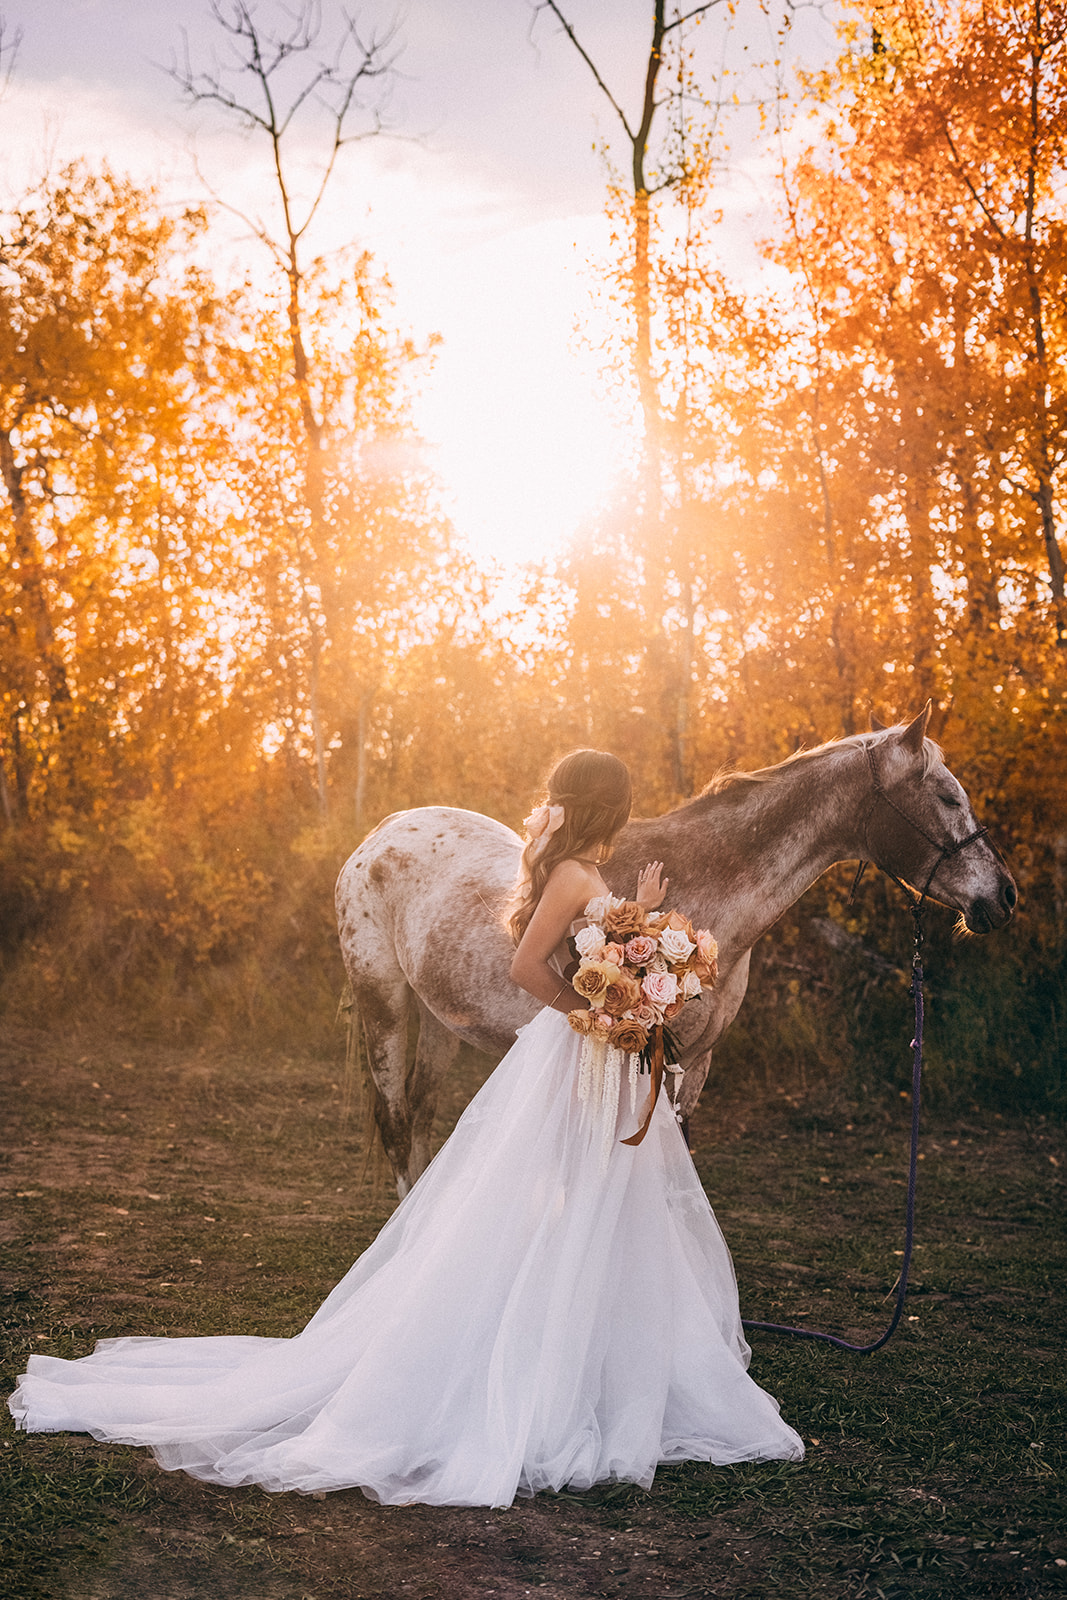 Intimate sunset wedding ceremony with intimate portiture